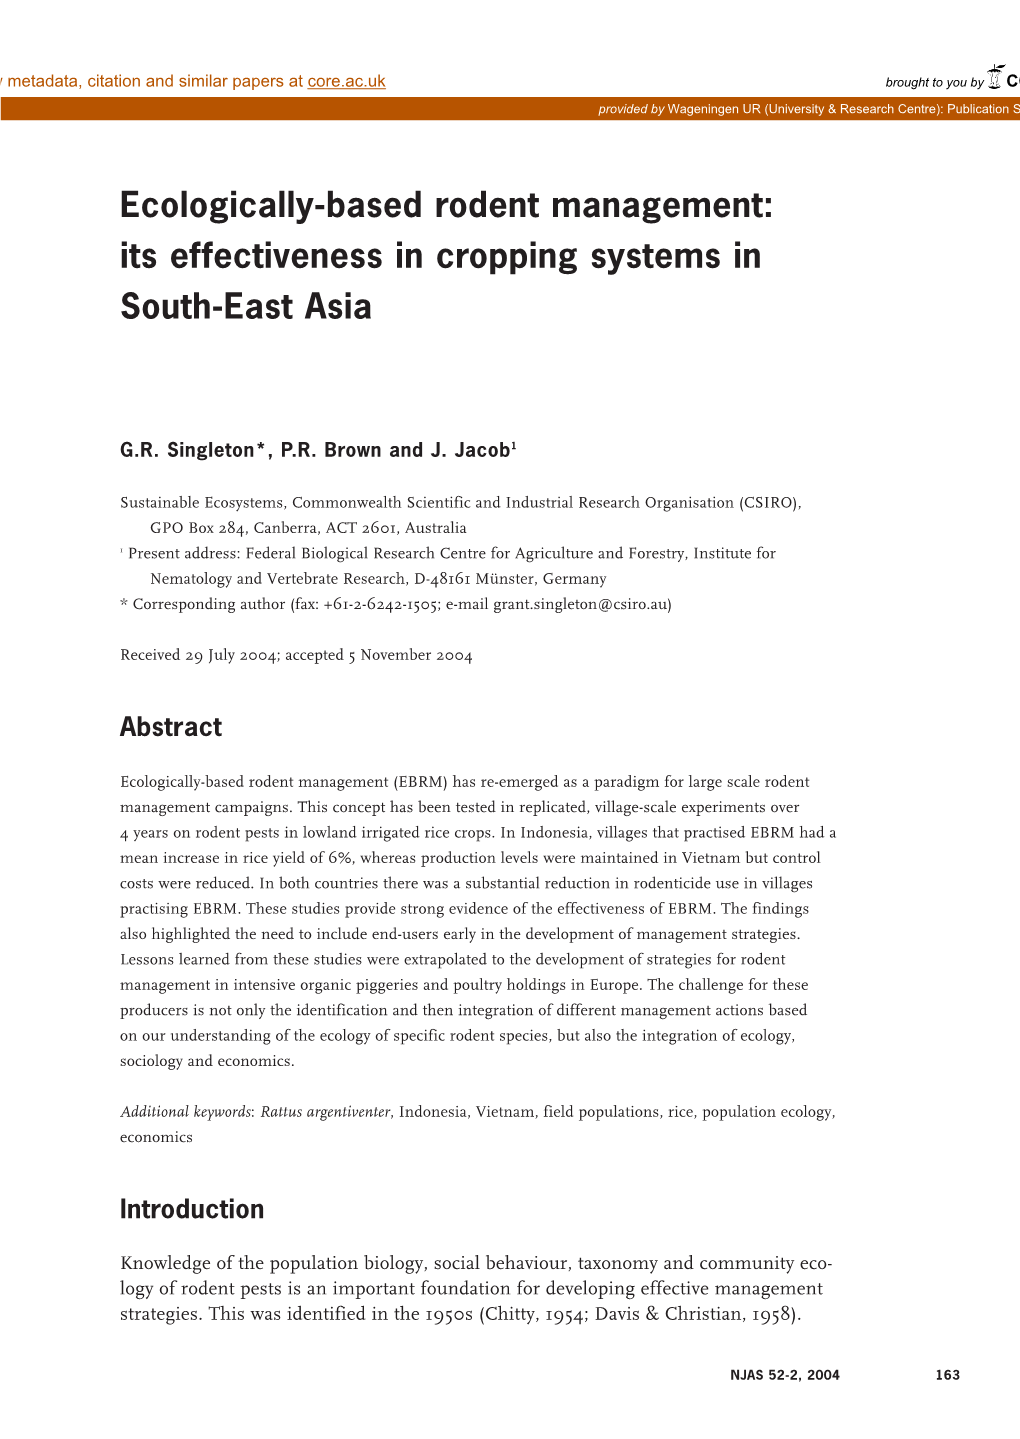 Ecologically-Based Rodent Management: Its Effectiveness in Cropping Systems in South-East Asia